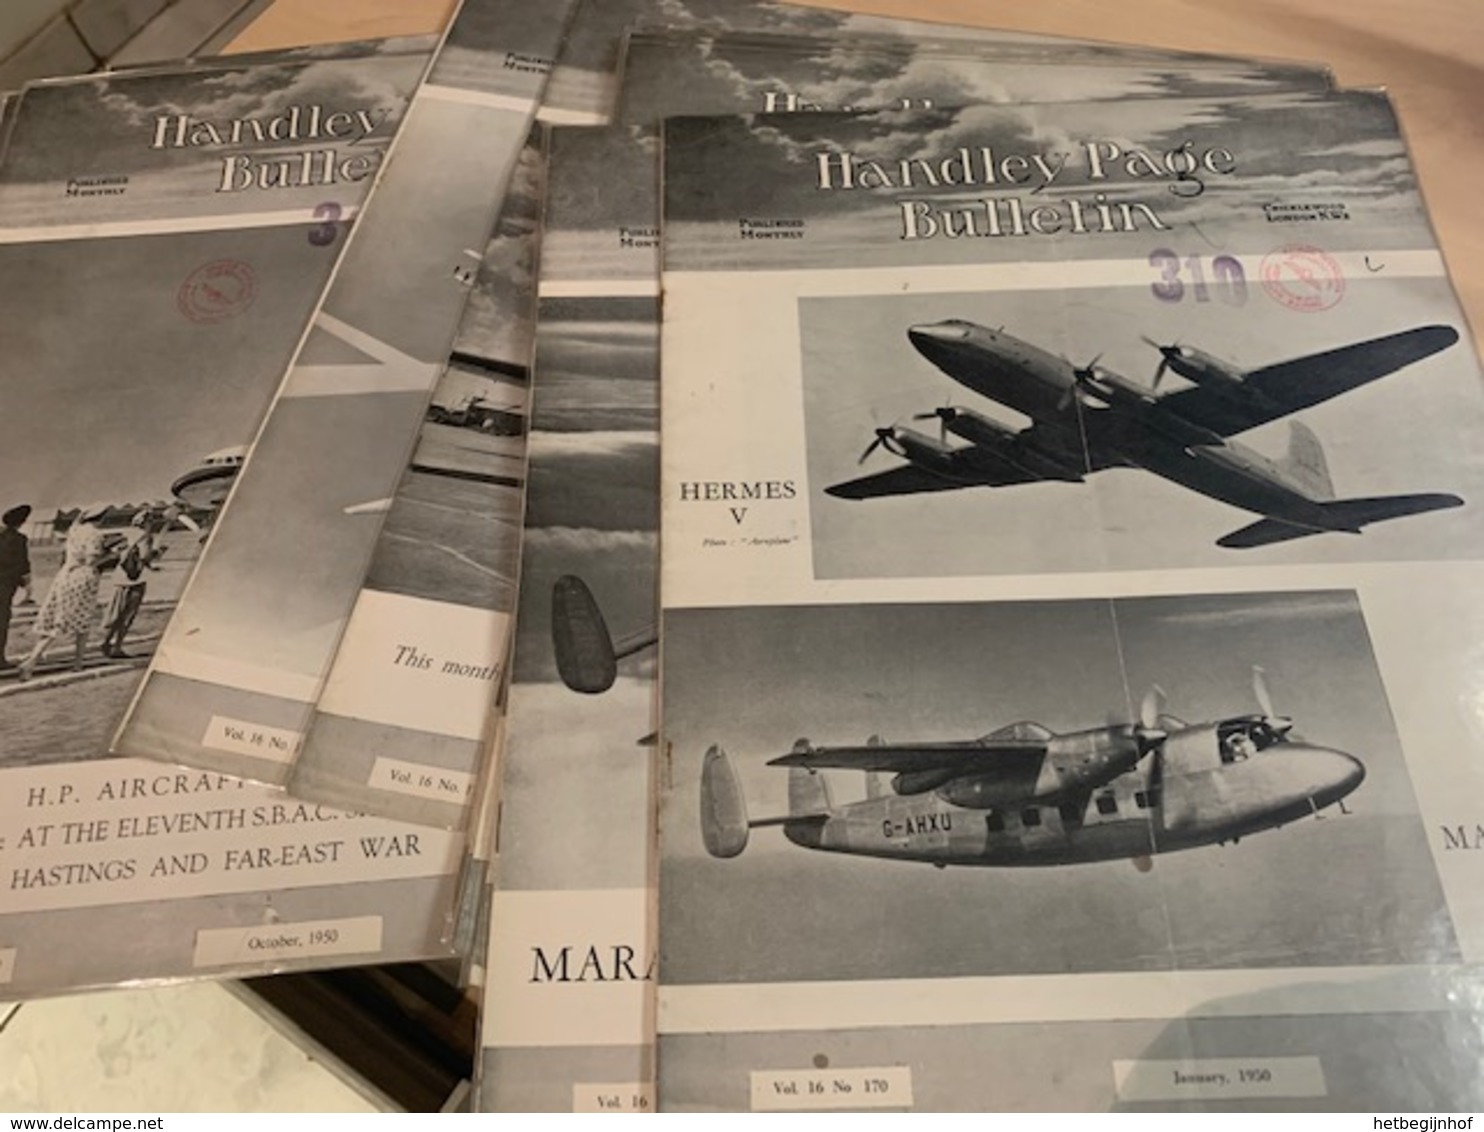 Handley Page Bulletin - Full Year 1950 - 12 NR's - Very Good - 1950-Now